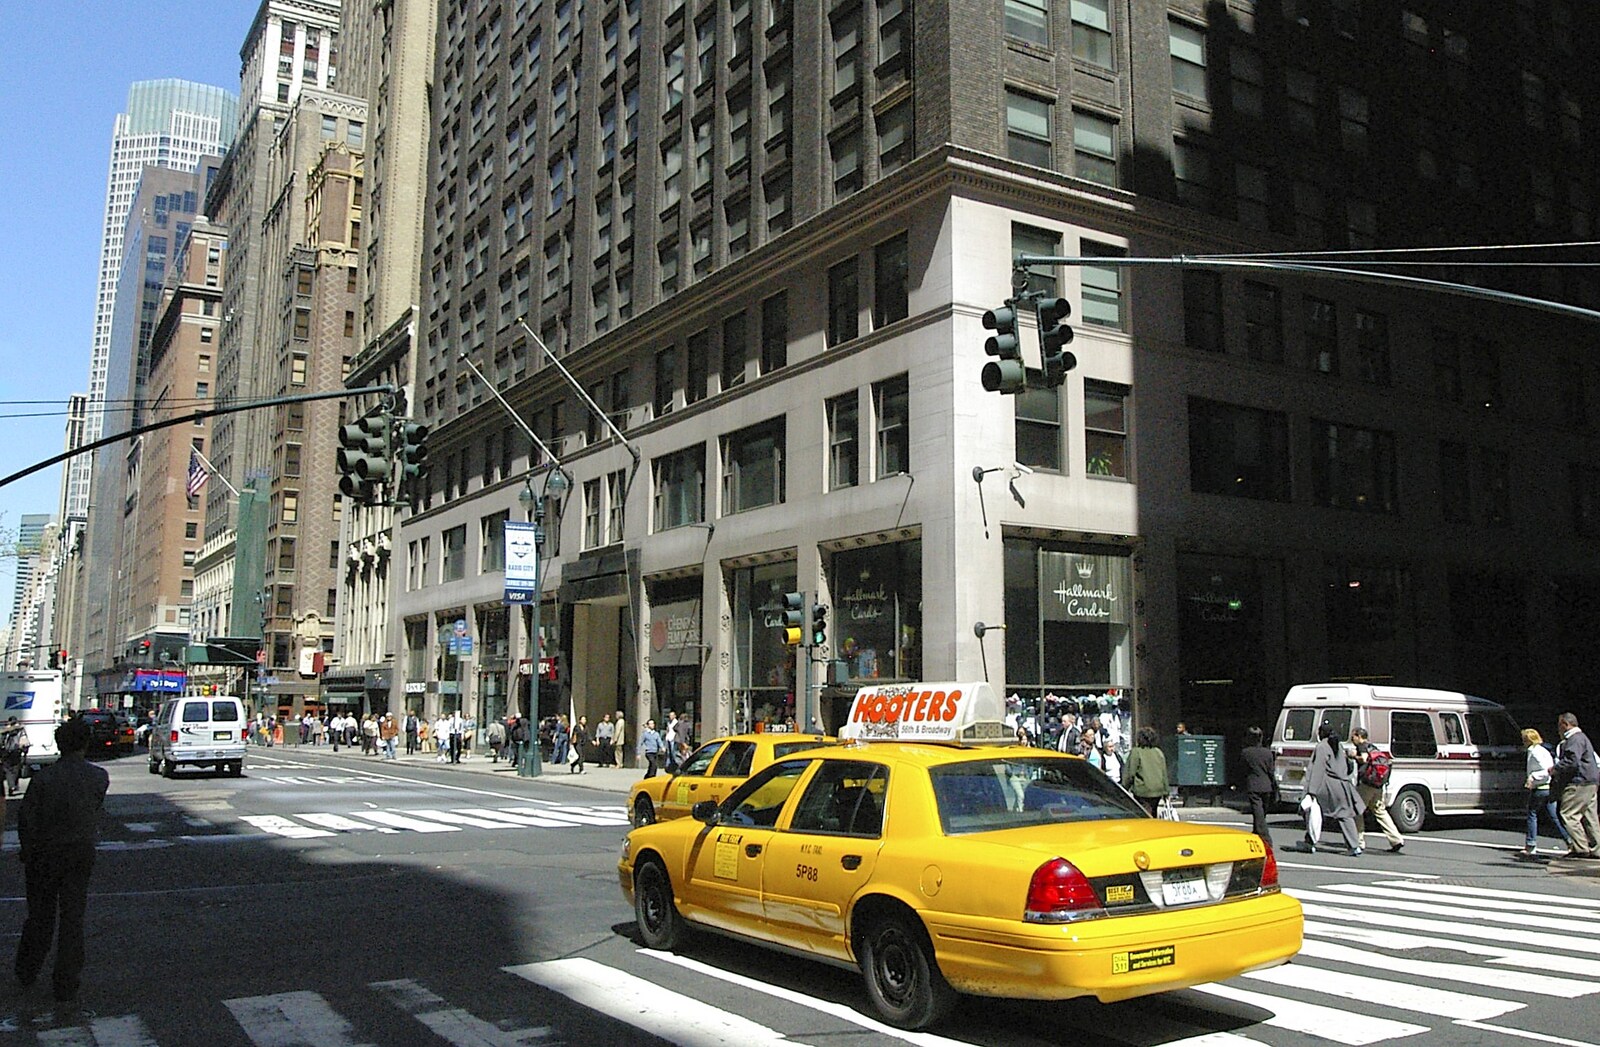 A taxi speeds past on 5th Avenue from Times Square, the Empire State and Ground Zero, New York, US - 1st May 2006